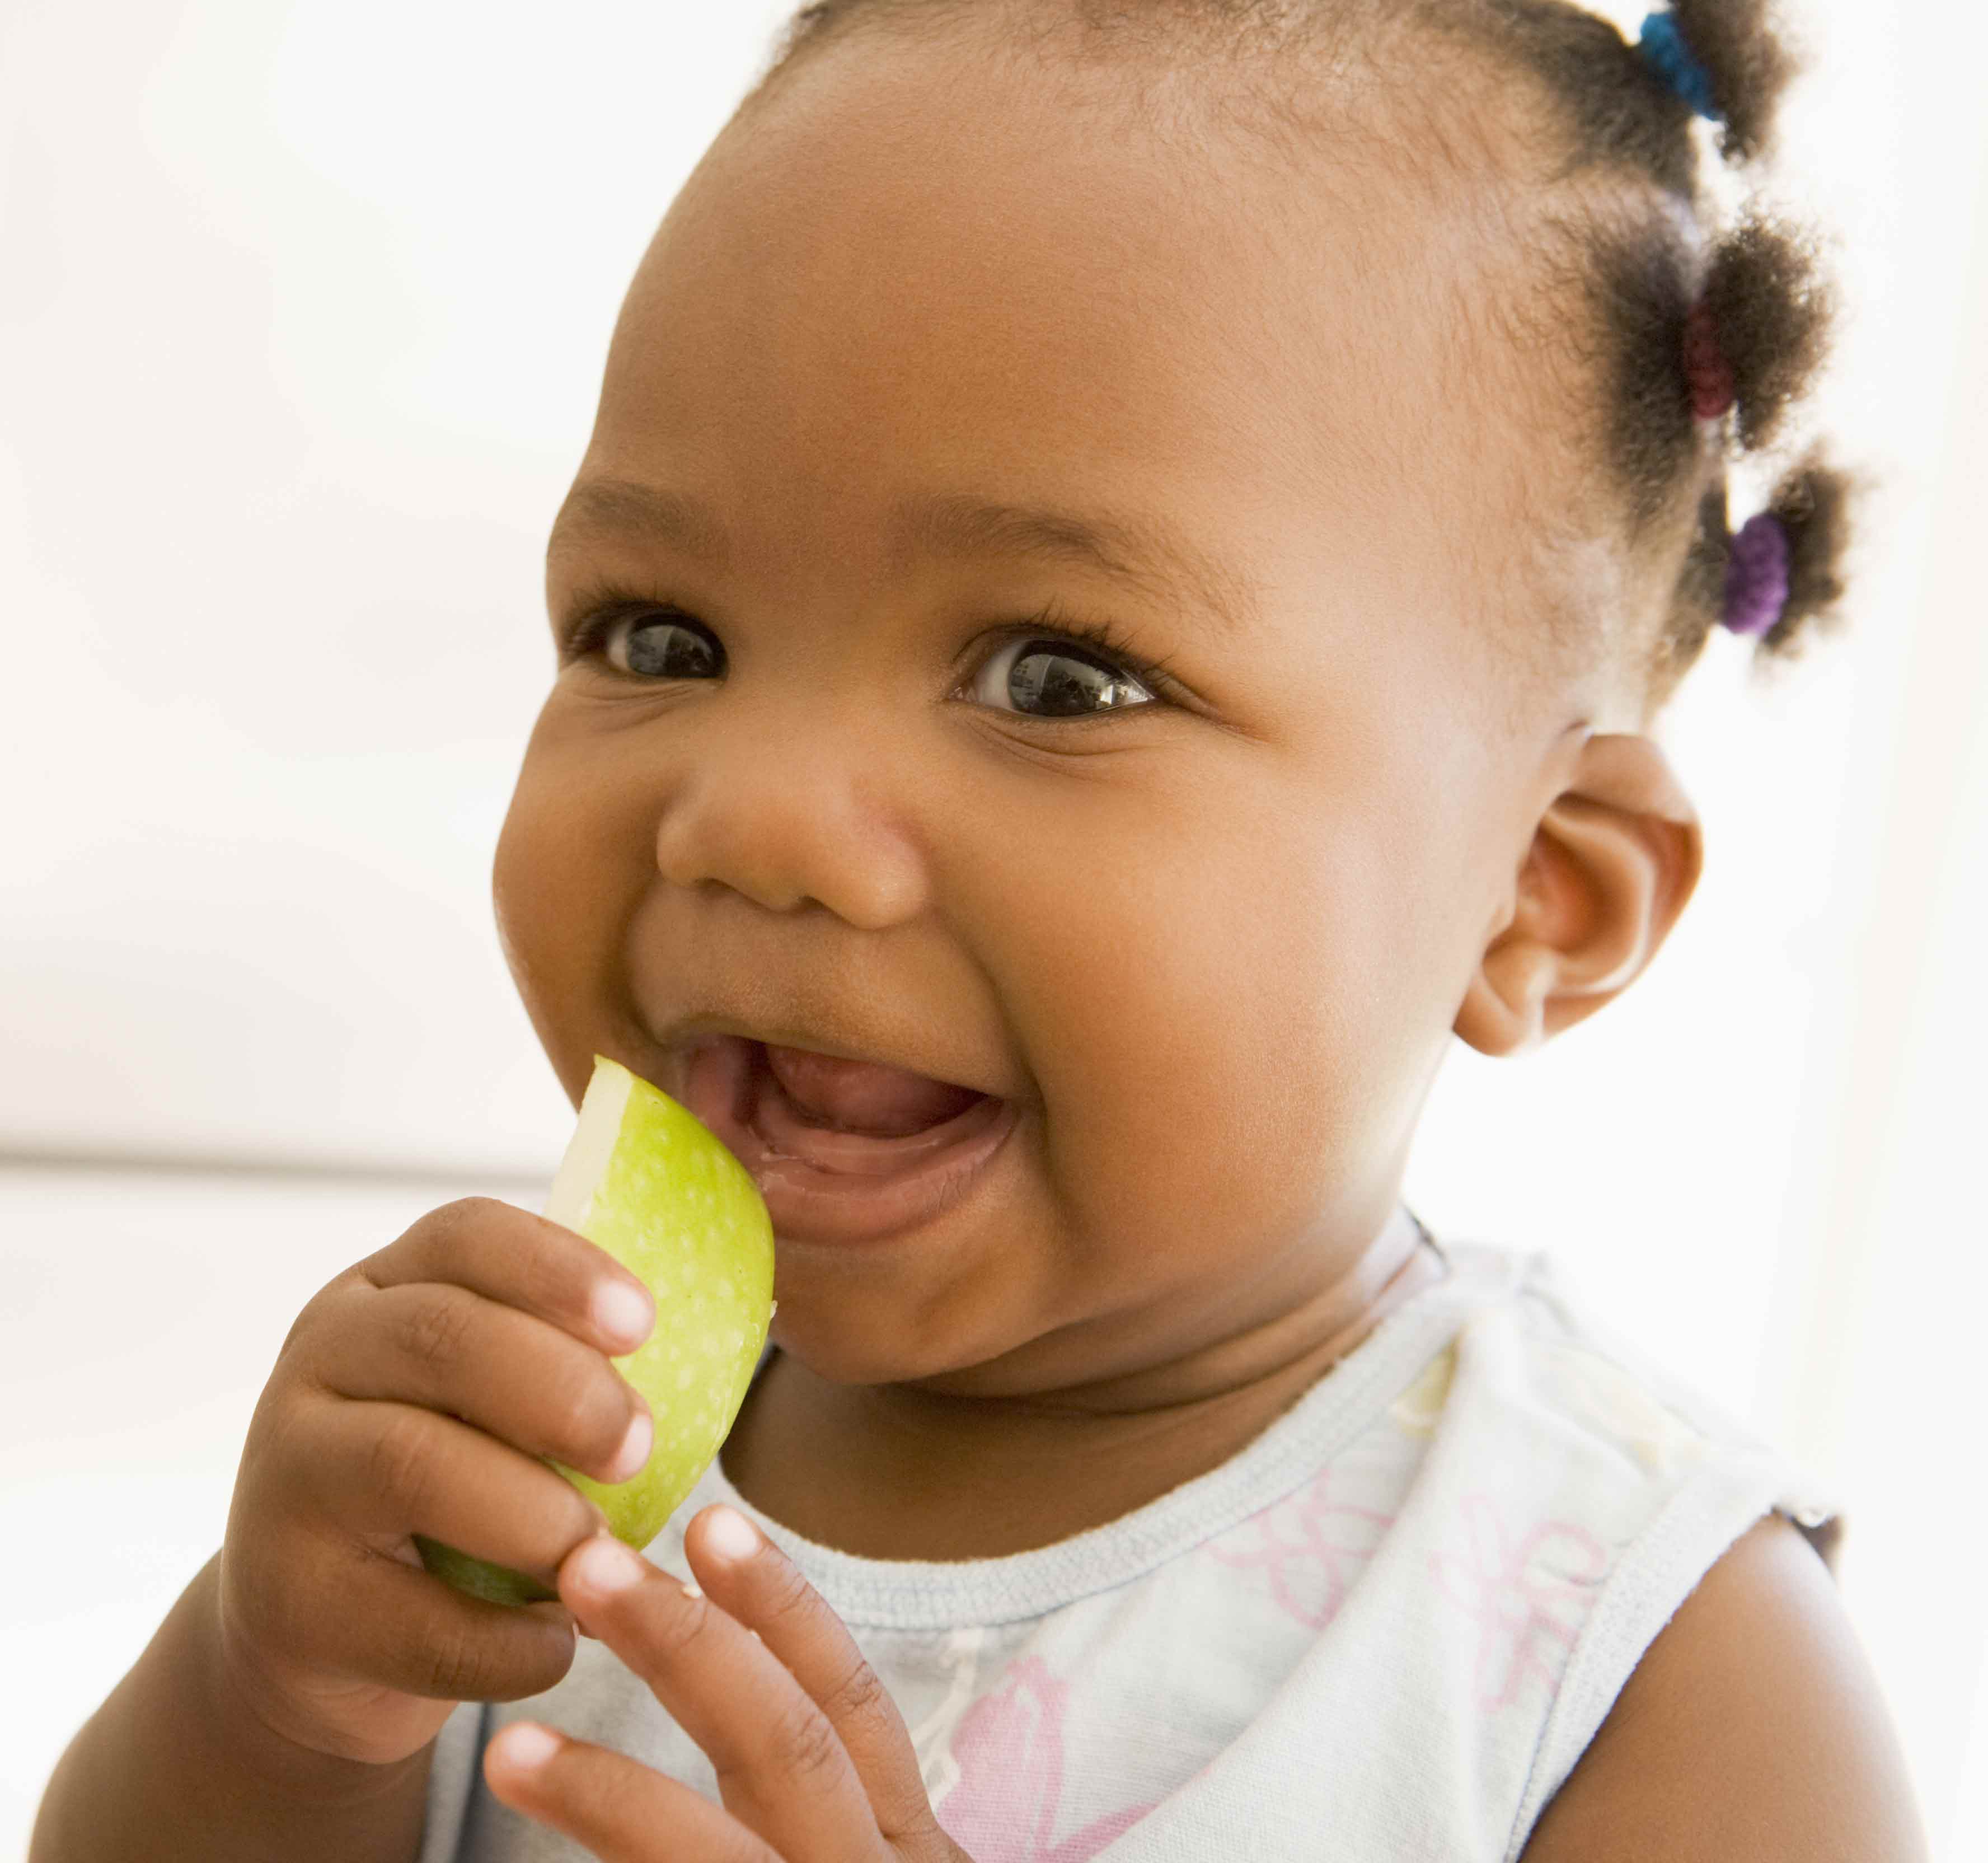 Baby-Led Weaning-Introducing Solids to Baby. Find out how to skip the purees and go straight to solid foods.